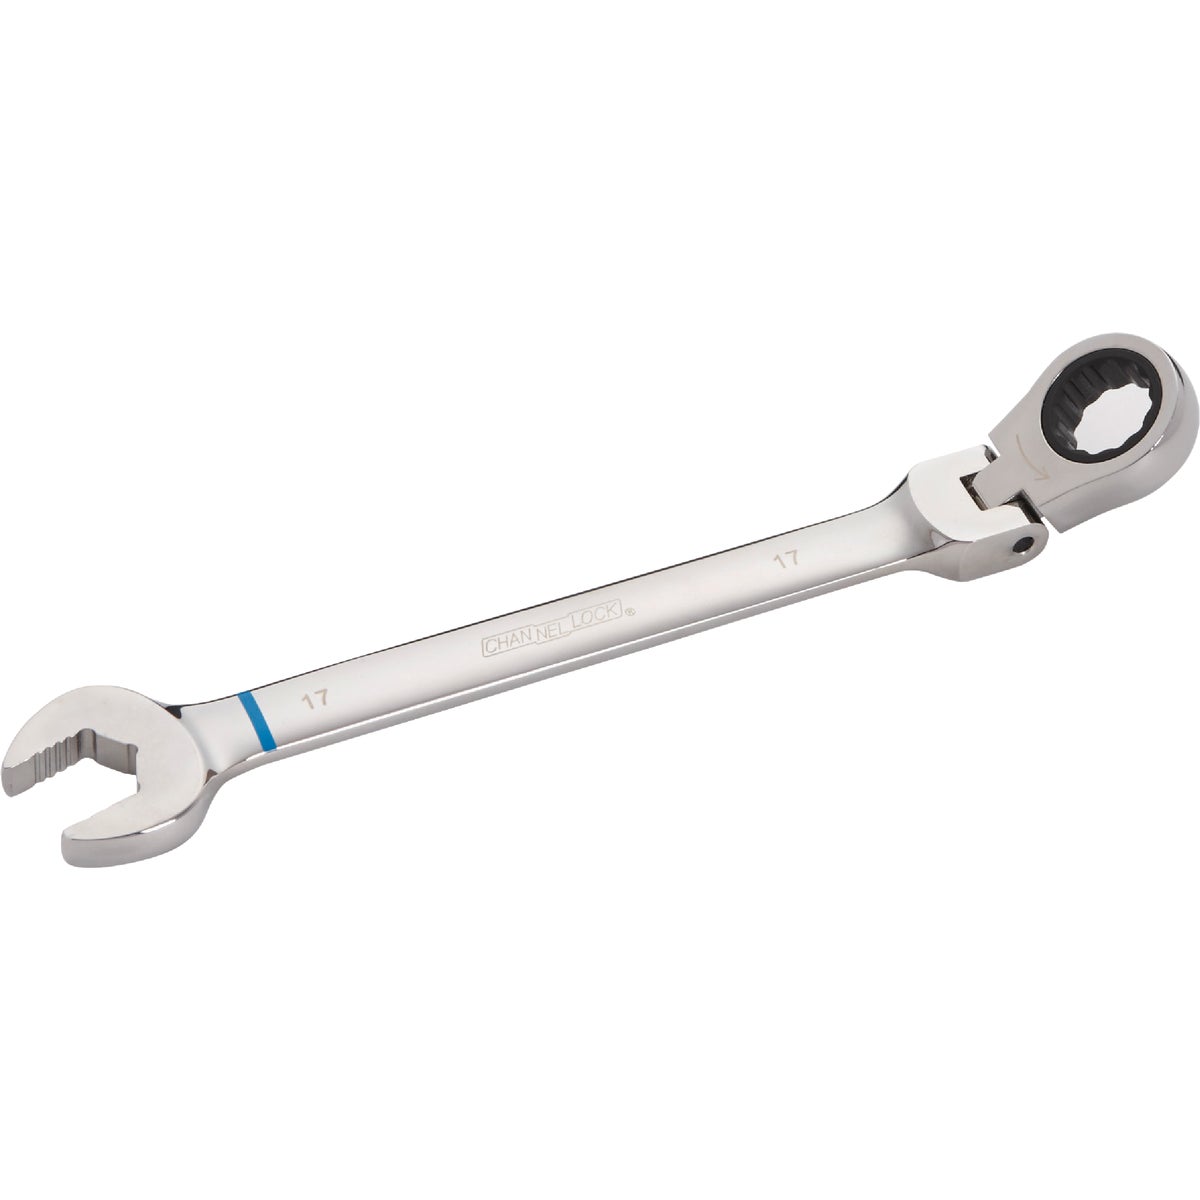 Channellock Metric 17 mm 12-Point Ratcheting Flex-Head Wrench